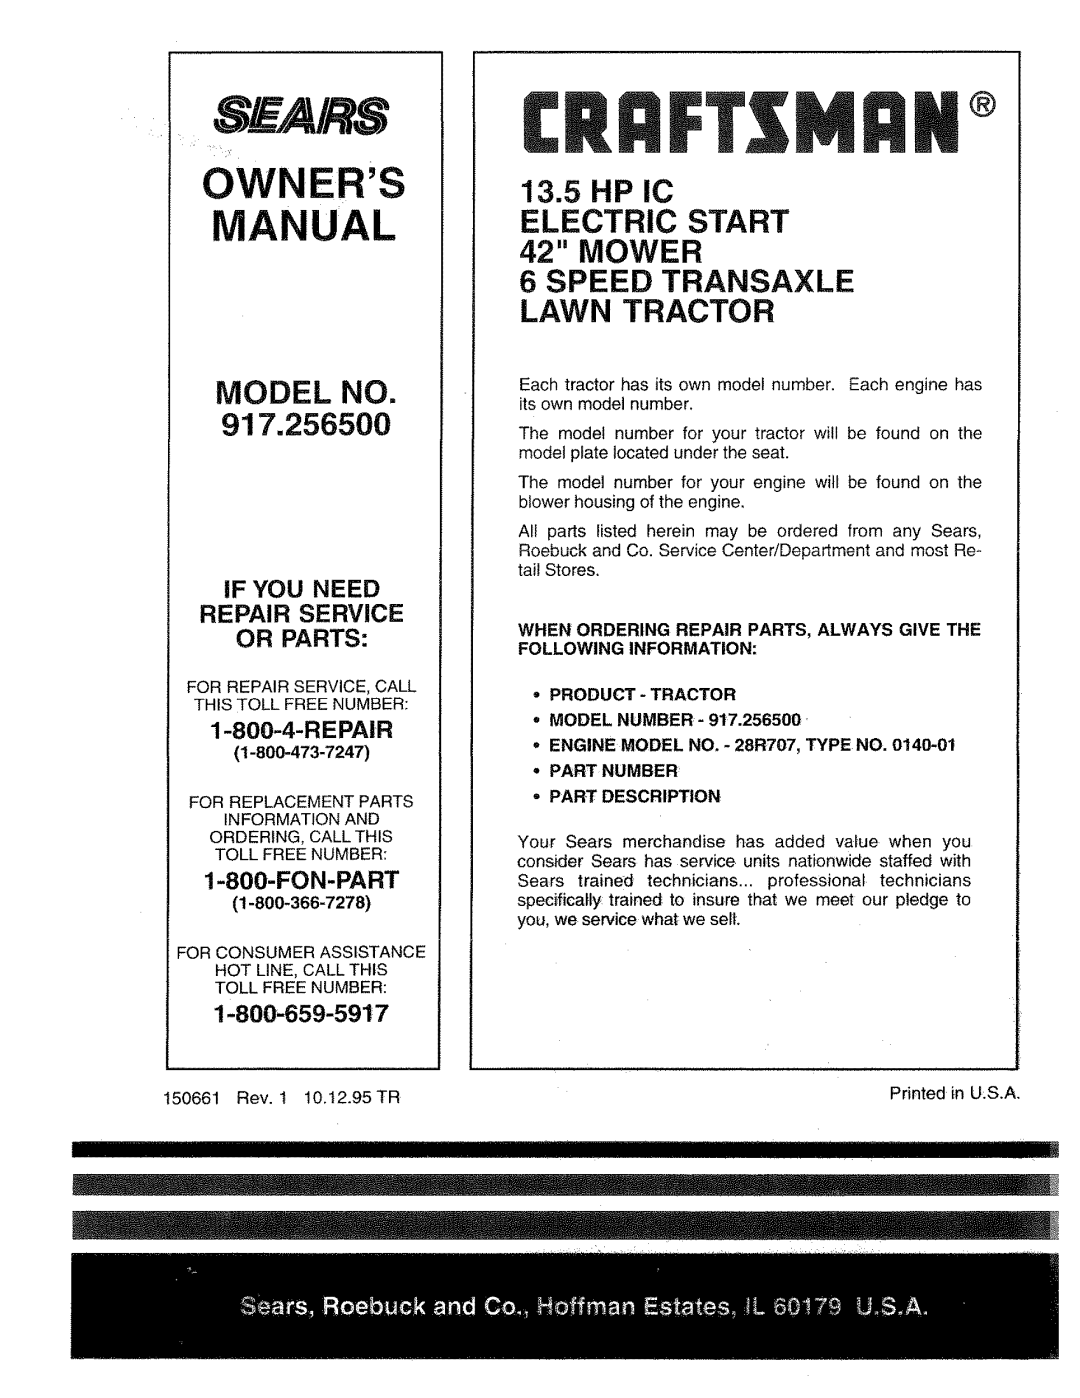 Sears 917.2565 Owners Manual, Model No, 13.5HP IC ELECTRIC START 42 MOWER, Speed Transaxle Lawn Tractor, Repair, Fon-Part 